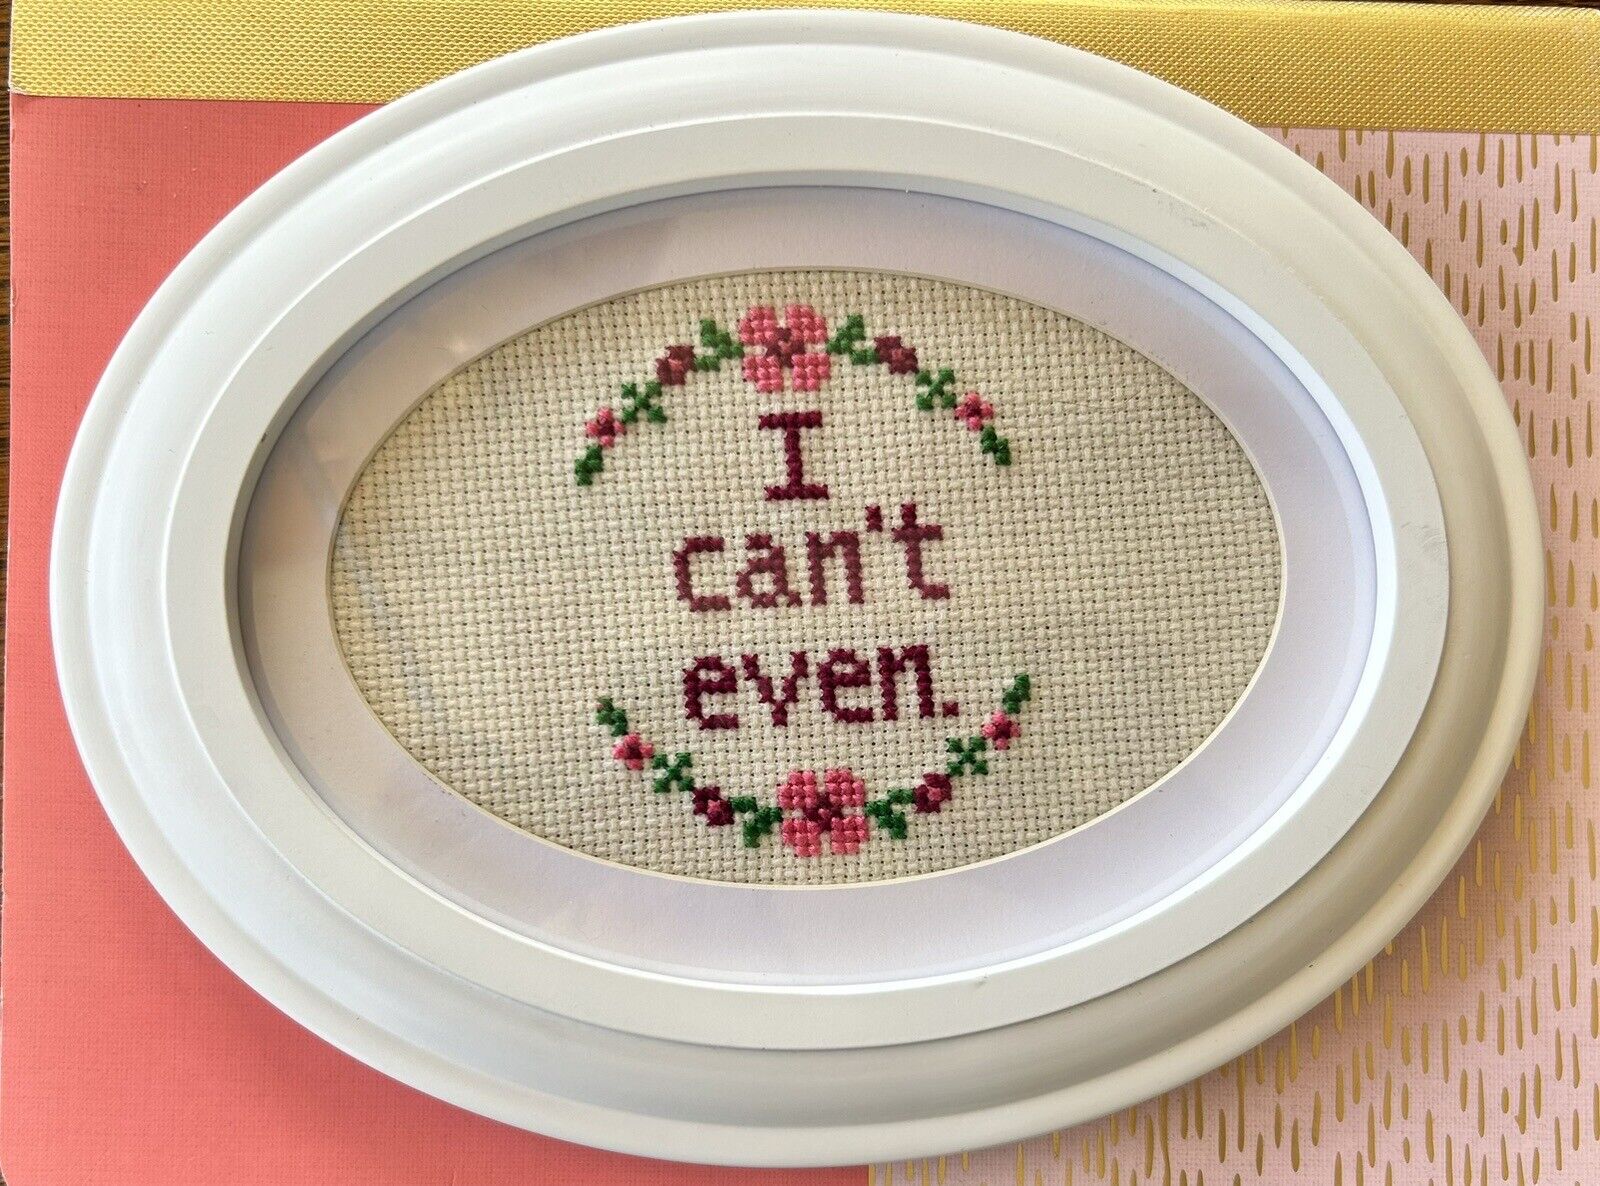 Funny cross stitch completed framed. I can’t even. 9in x 7in